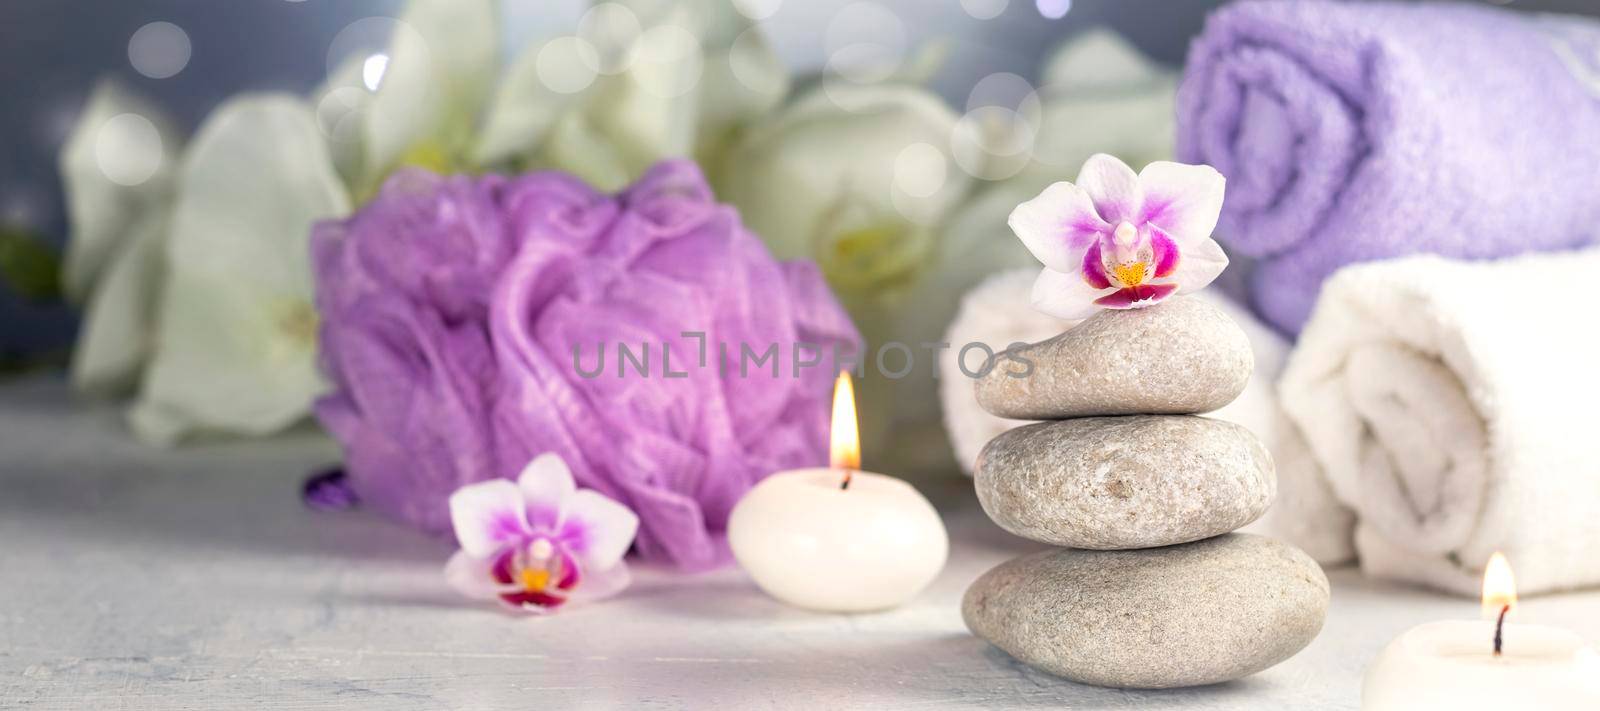 banner with massage stones, burning candles, rolled towels, flowers, abstract lights. Spa resort therapy composition by Leoschka